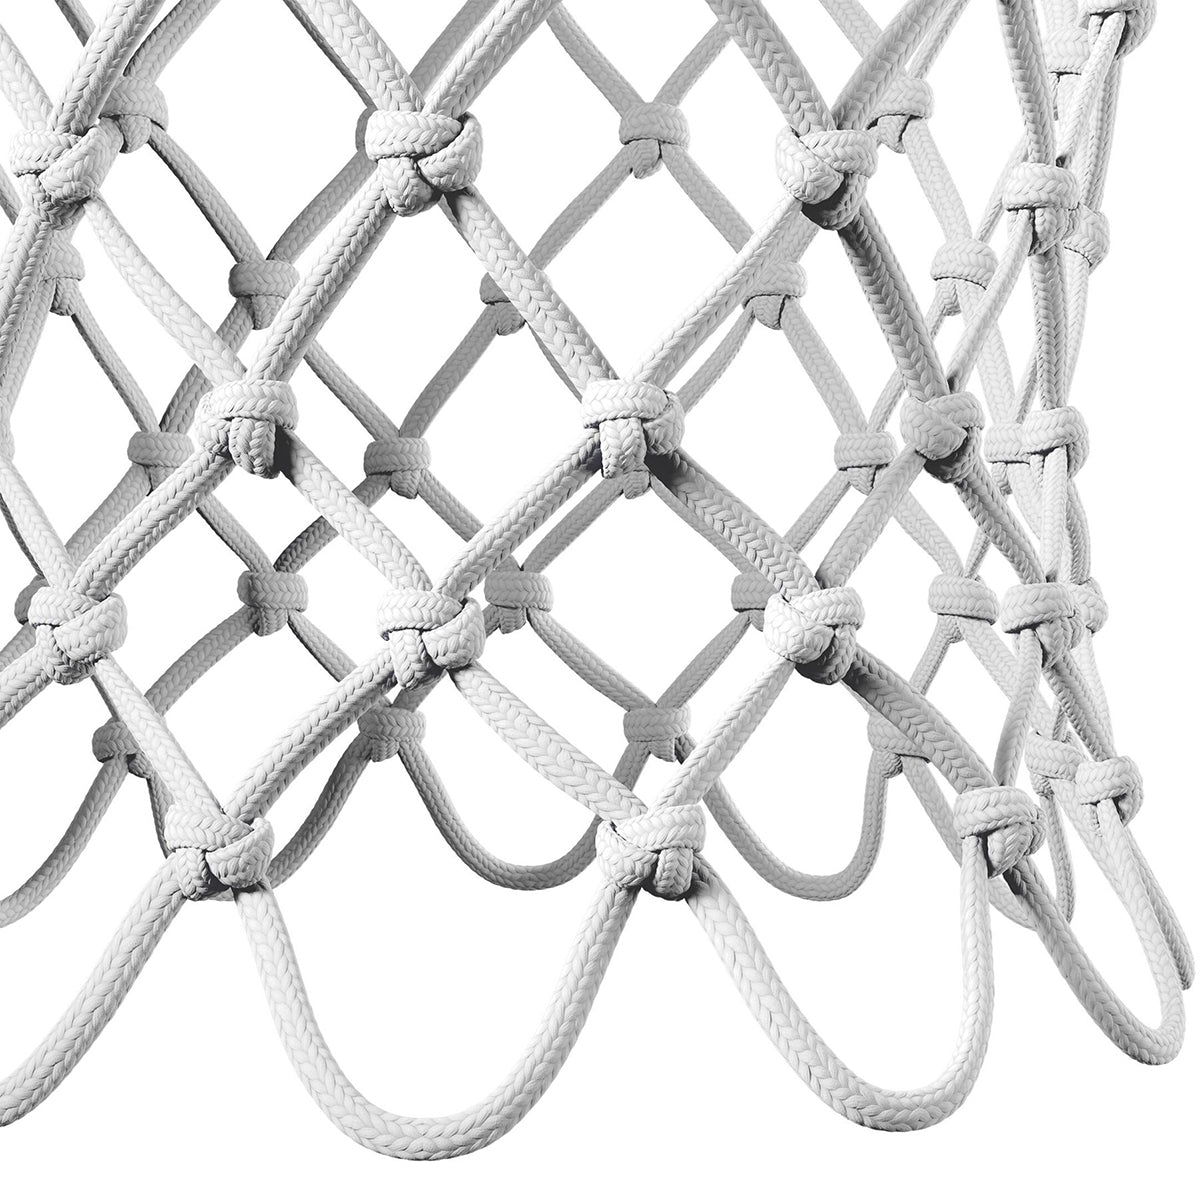 Spalding All-Weather Outdoor Basketball Net Spalding